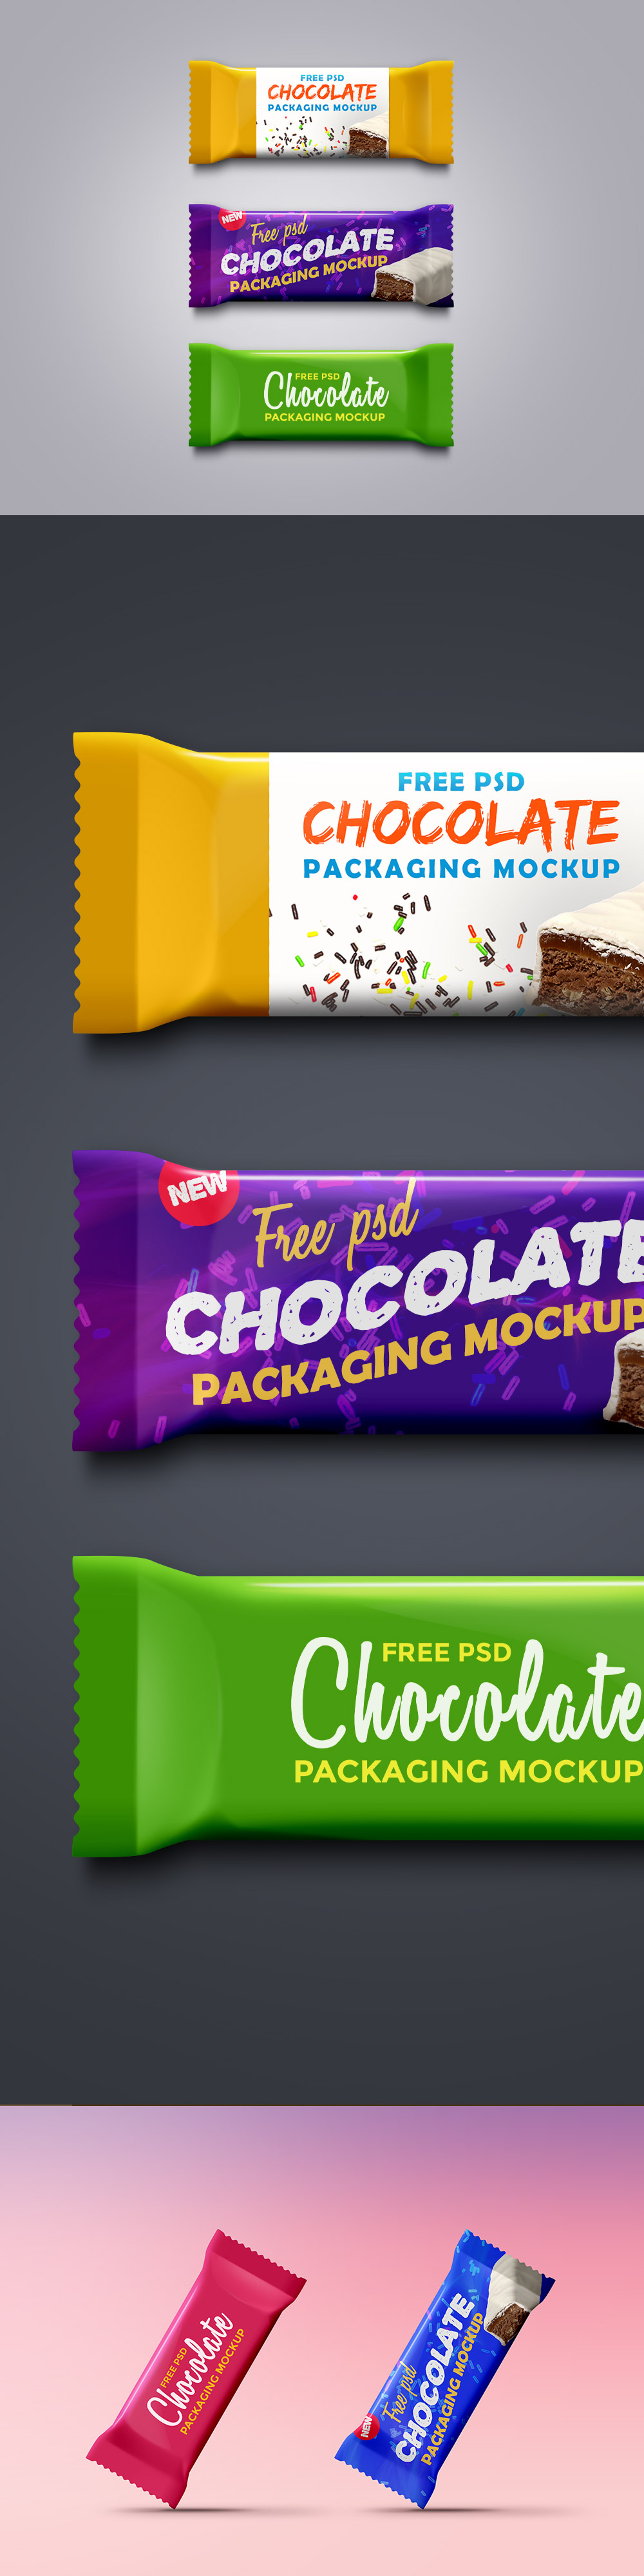 Download Chocolate Packaging MockUp PSD Template - LTHEME